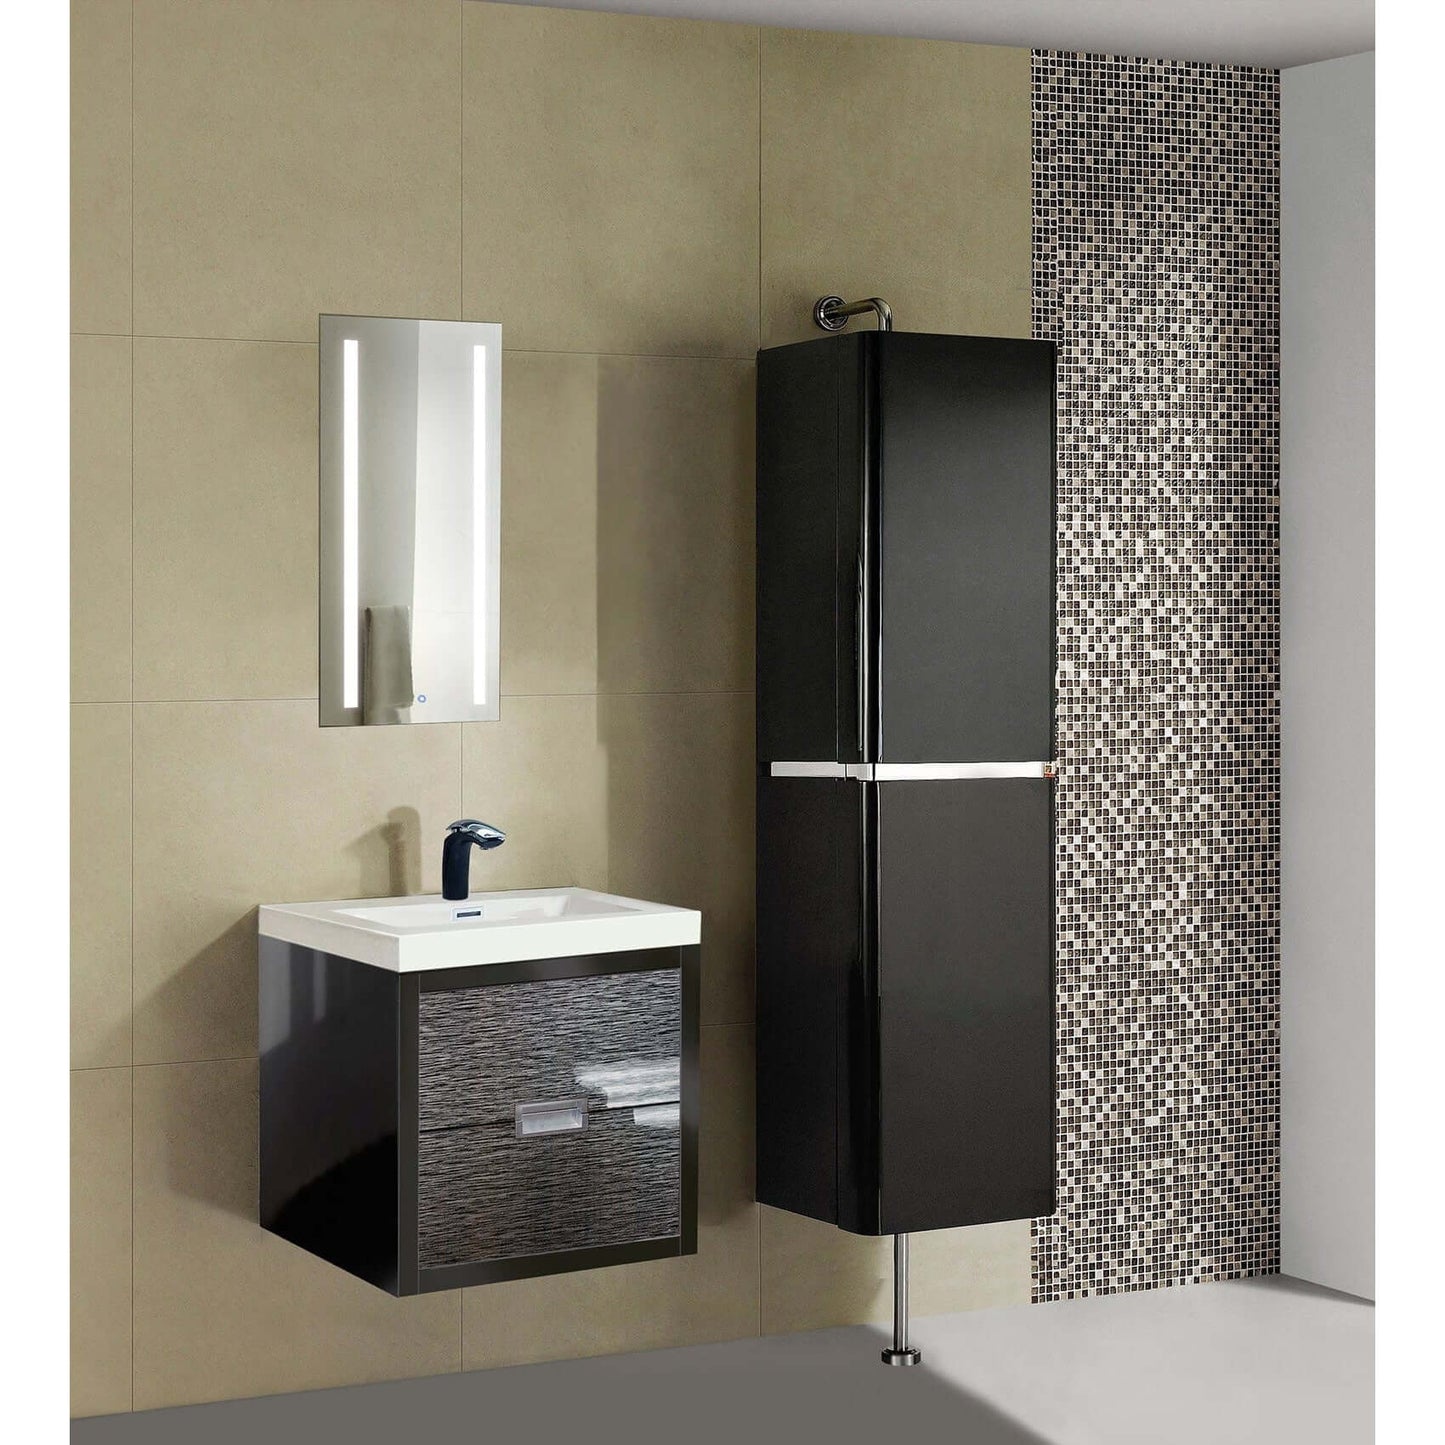 Contemporary bathroom featuring a recessed Kinetic LED medicine cabinet